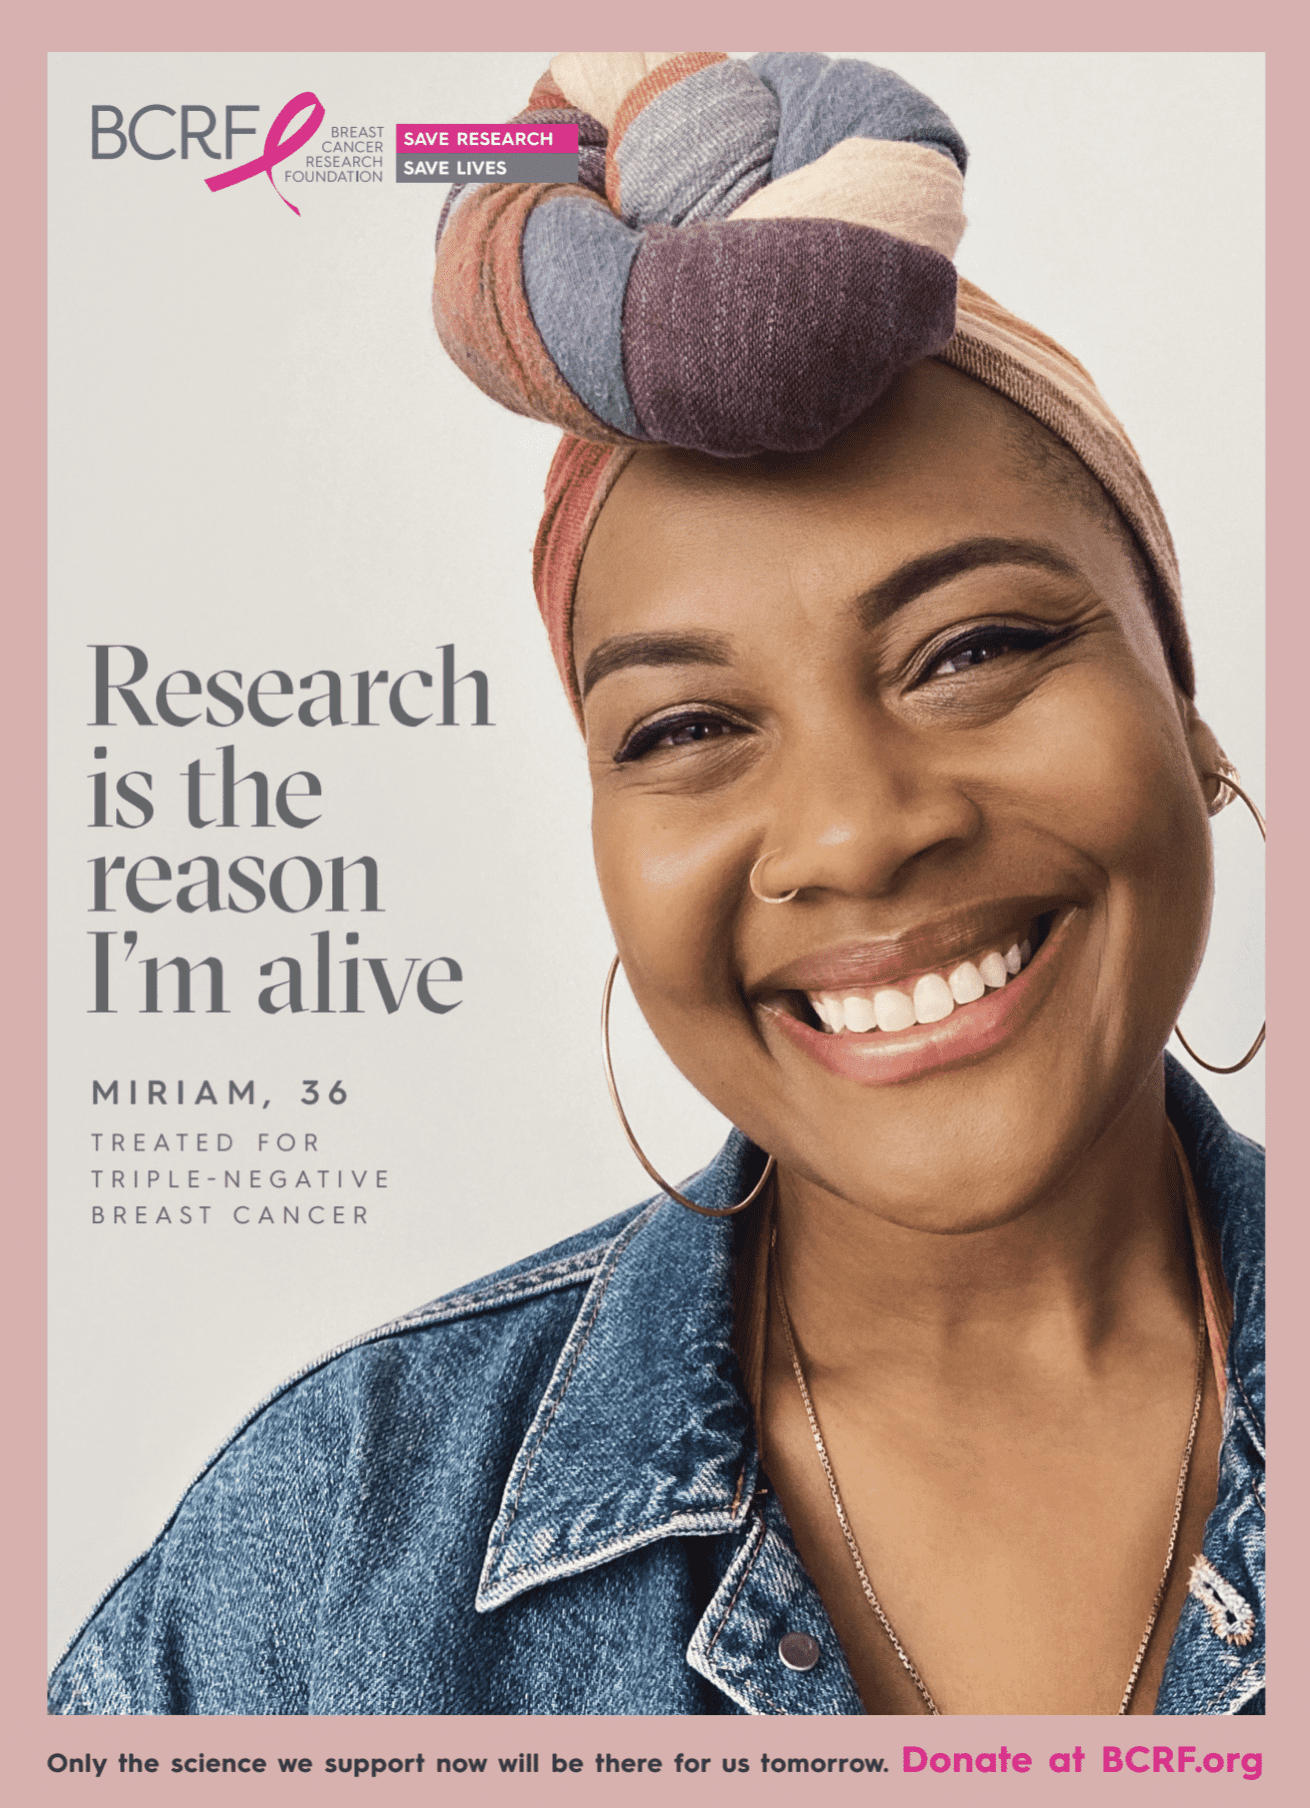 Picture of BCRF Magazine cover - woman smiling, headline says "research is the reason I'm alive" subtitled "Miriam, 36, treated for triple-negative breast cancer